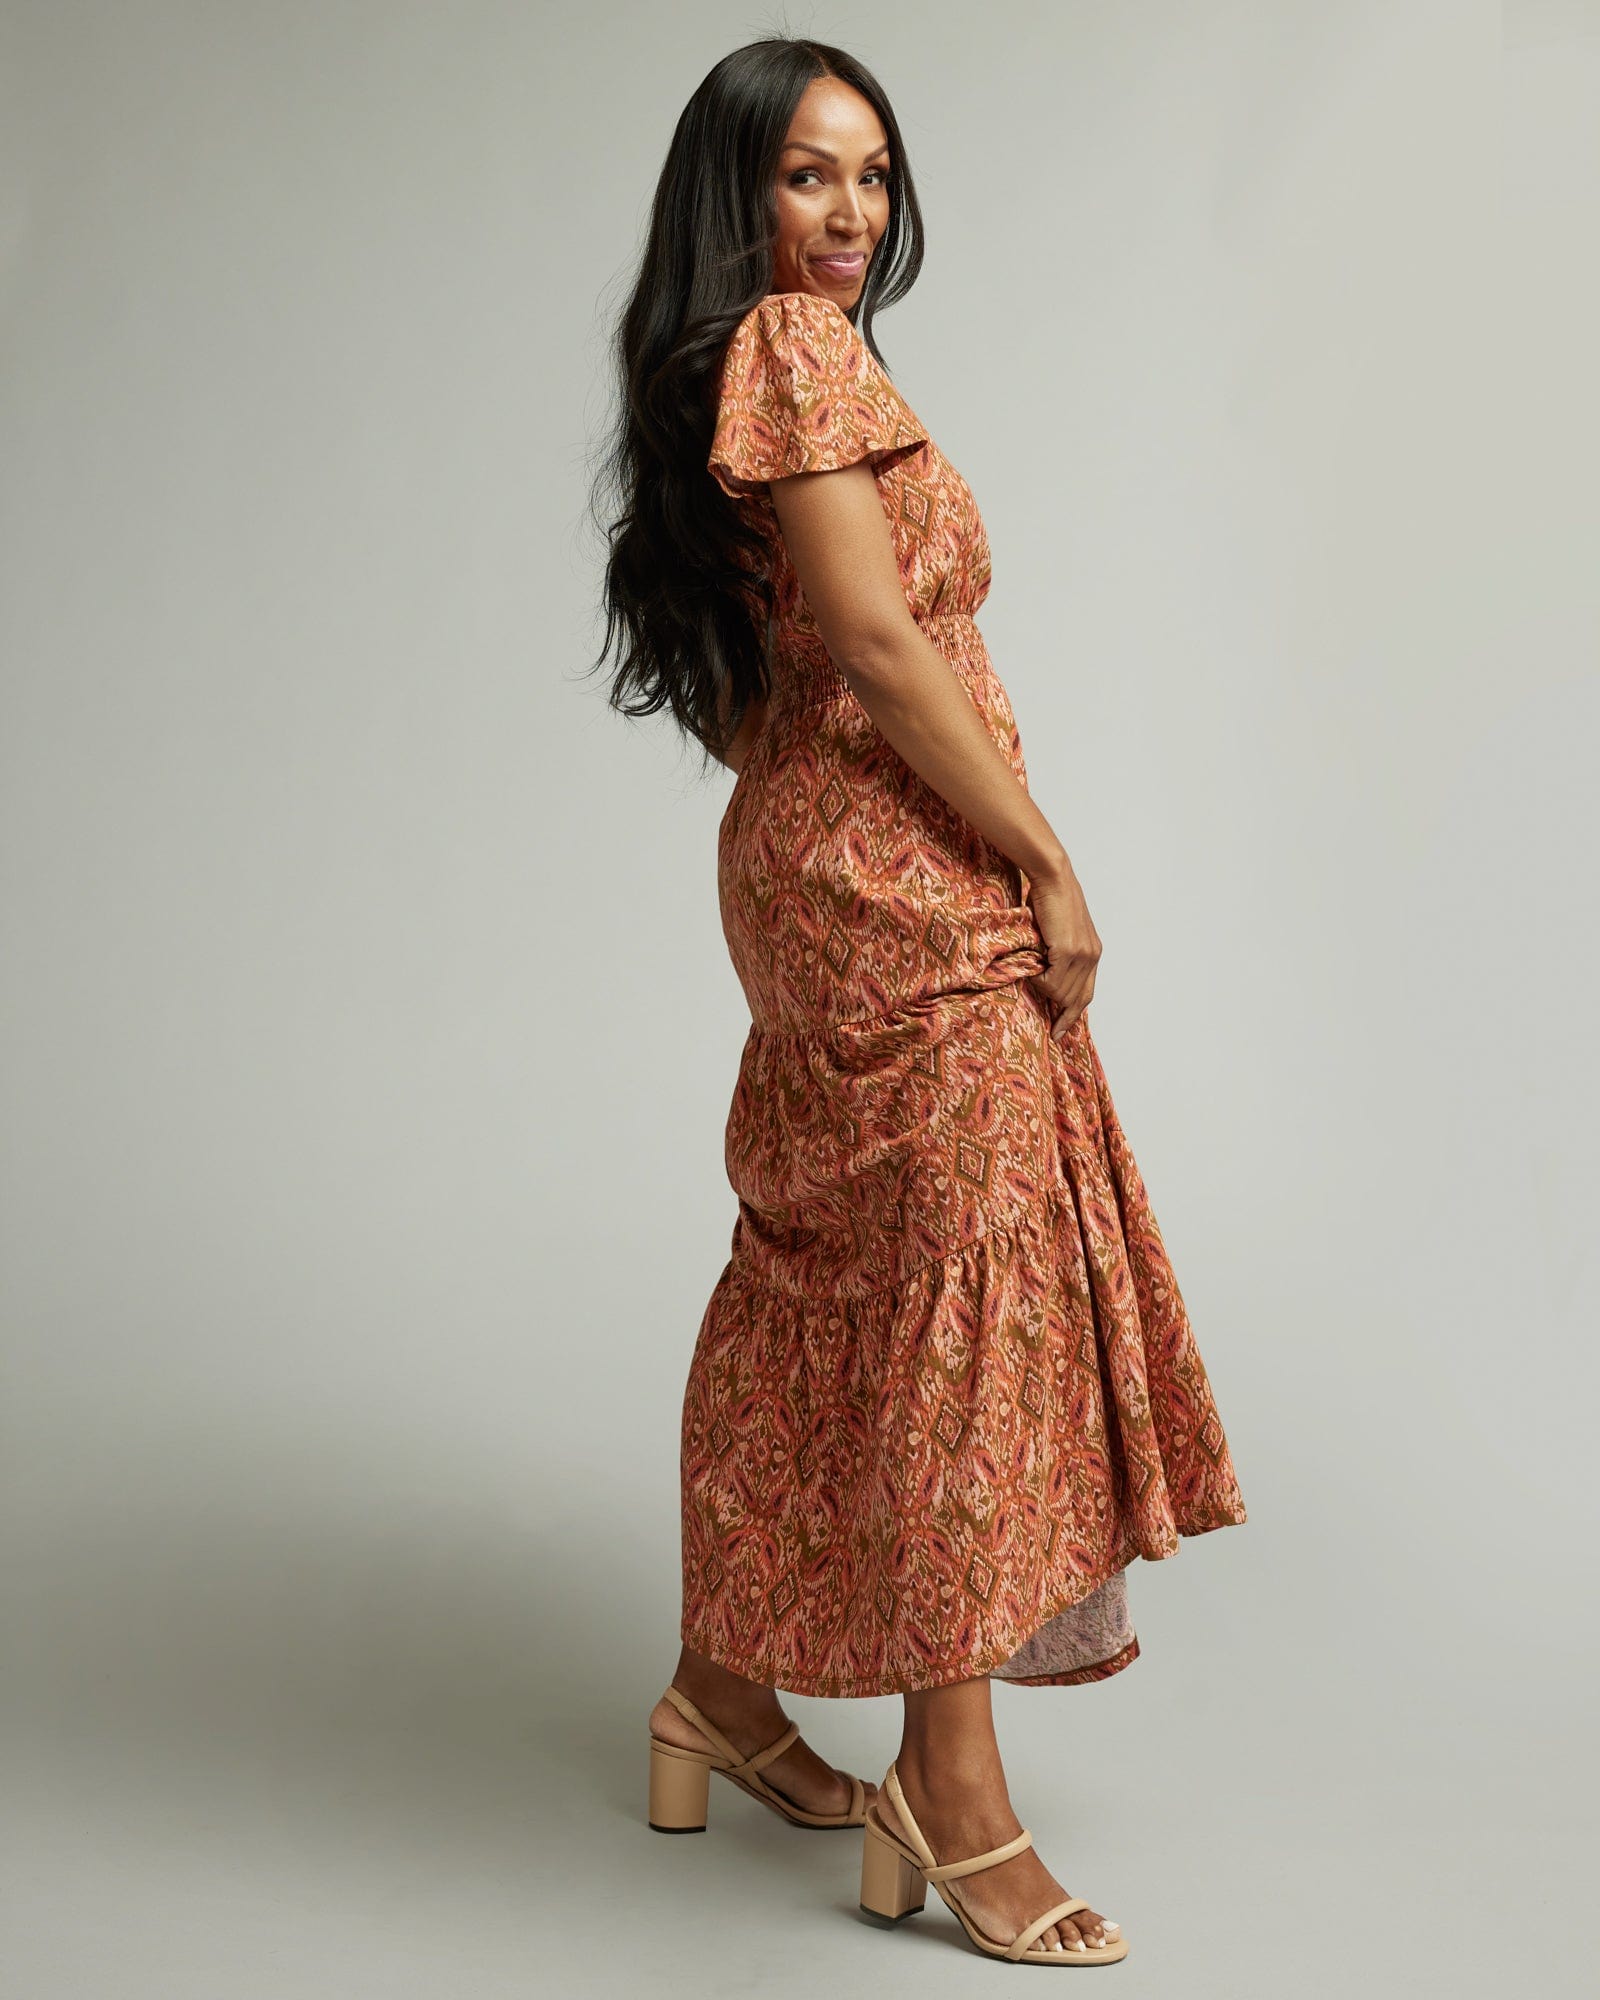 Woman in a short sleeve, orange and brown, maxi dress